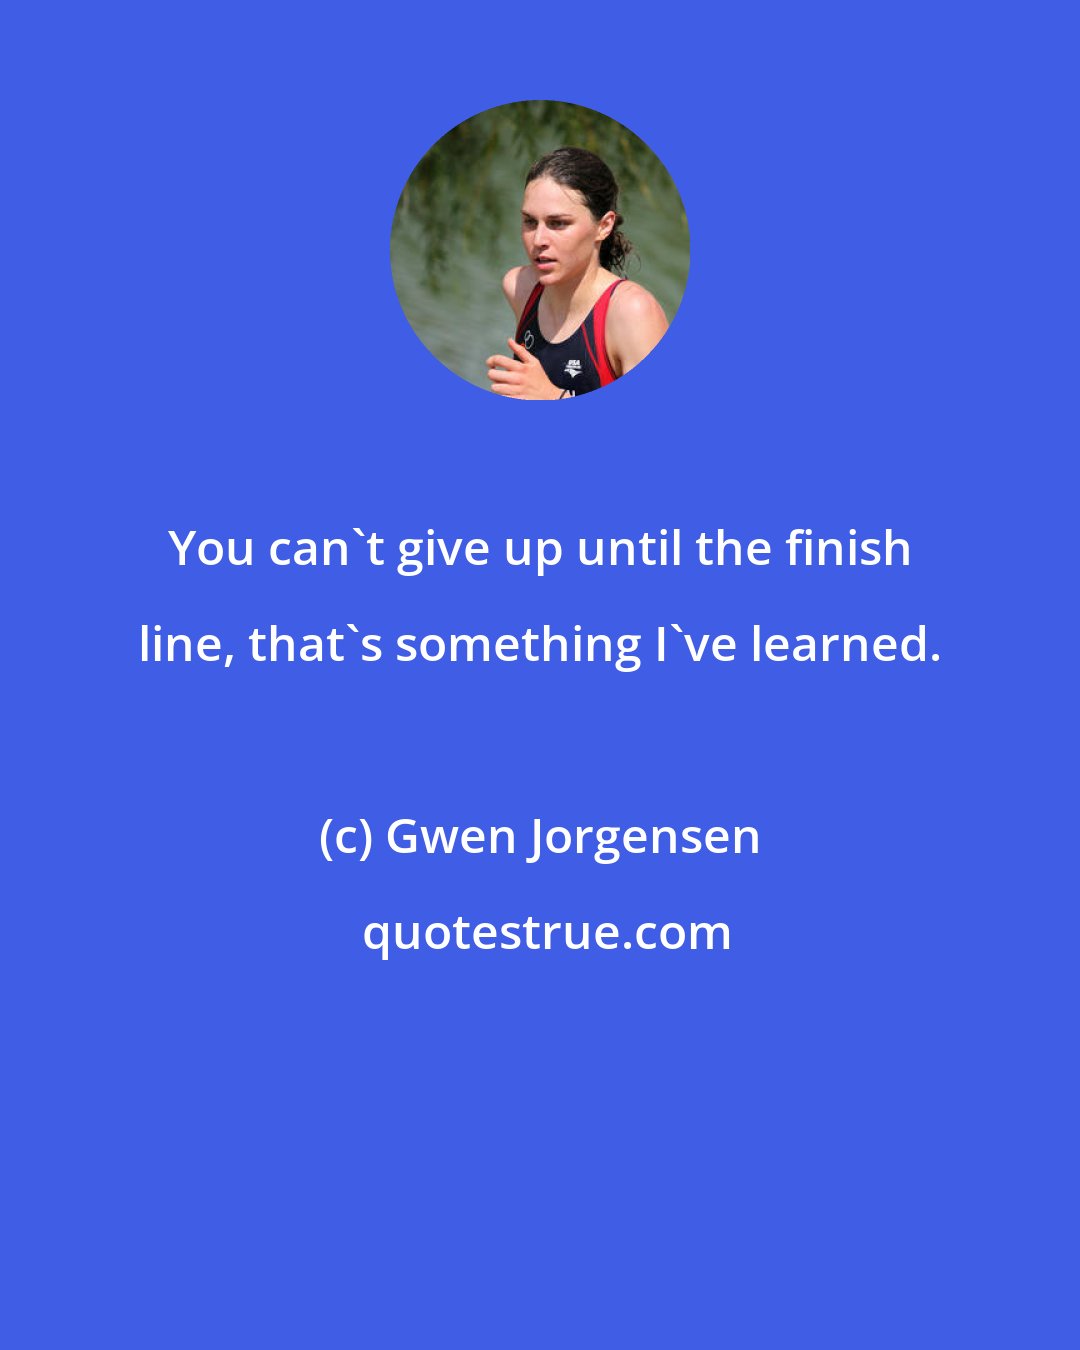 Gwen Jorgensen: You can't give up until the finish line, that's something I've learned.